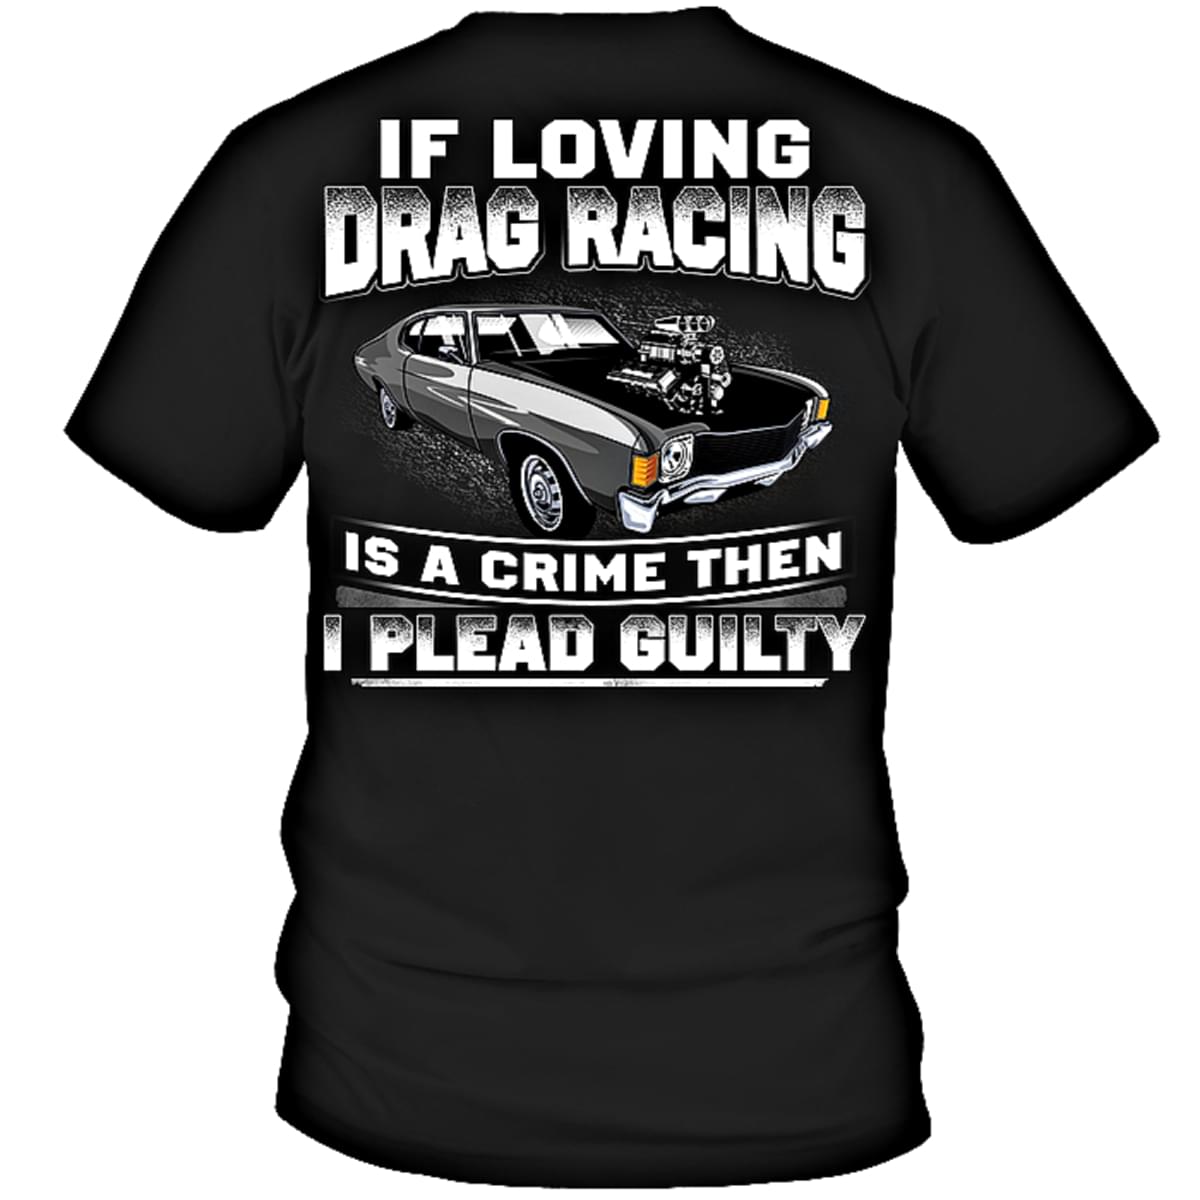 If loving drag racing is a crime then I plead guilty